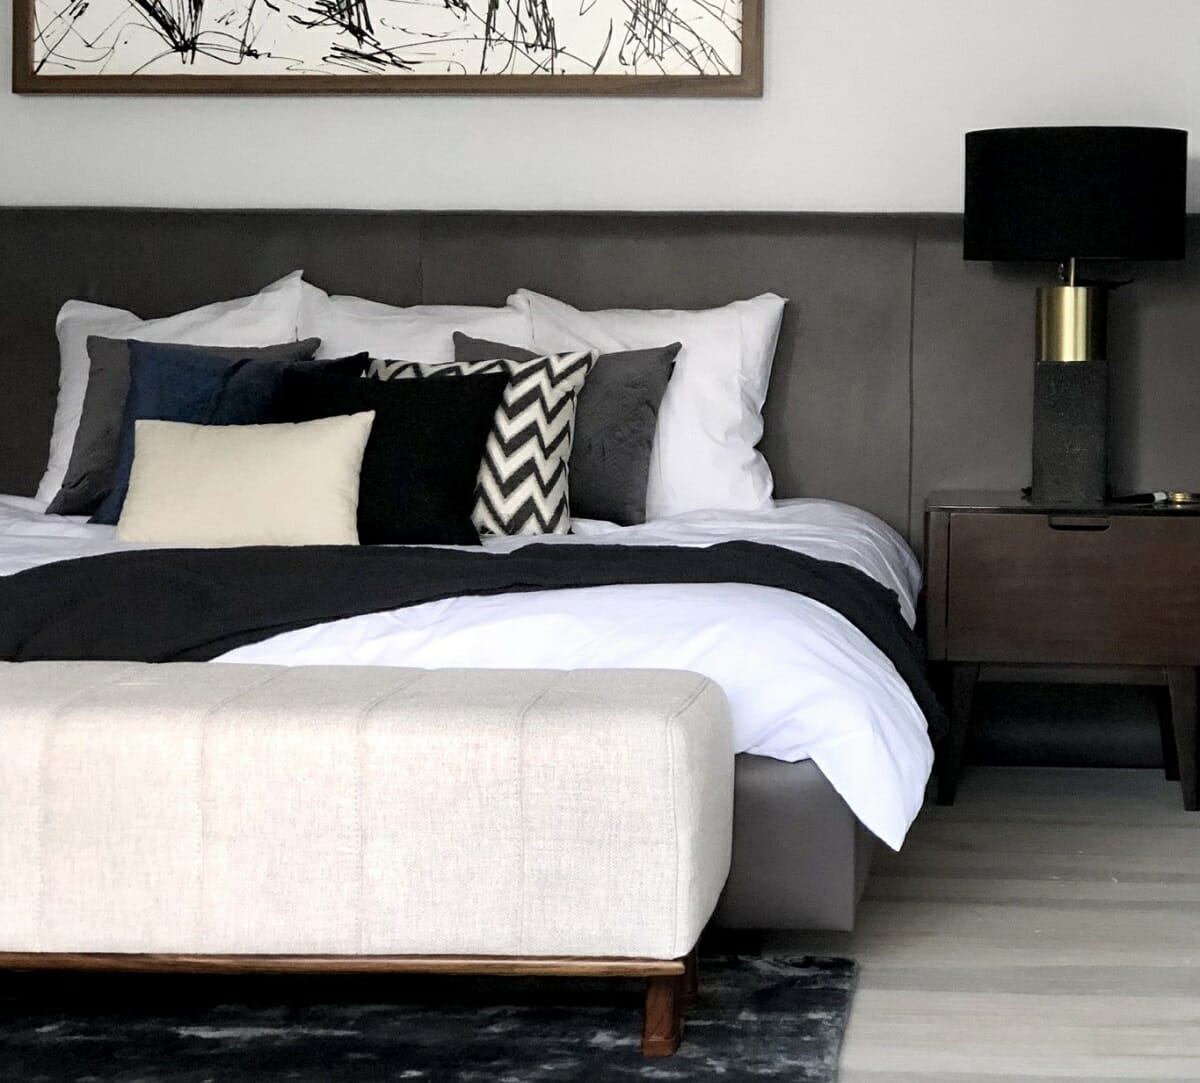 https://www.decorilla.com/online-decorating/wp-content/uploads/2023/09/Simple-king-bed-pillow-arrangement-with-a-black-and-white-color-scheme.jpg